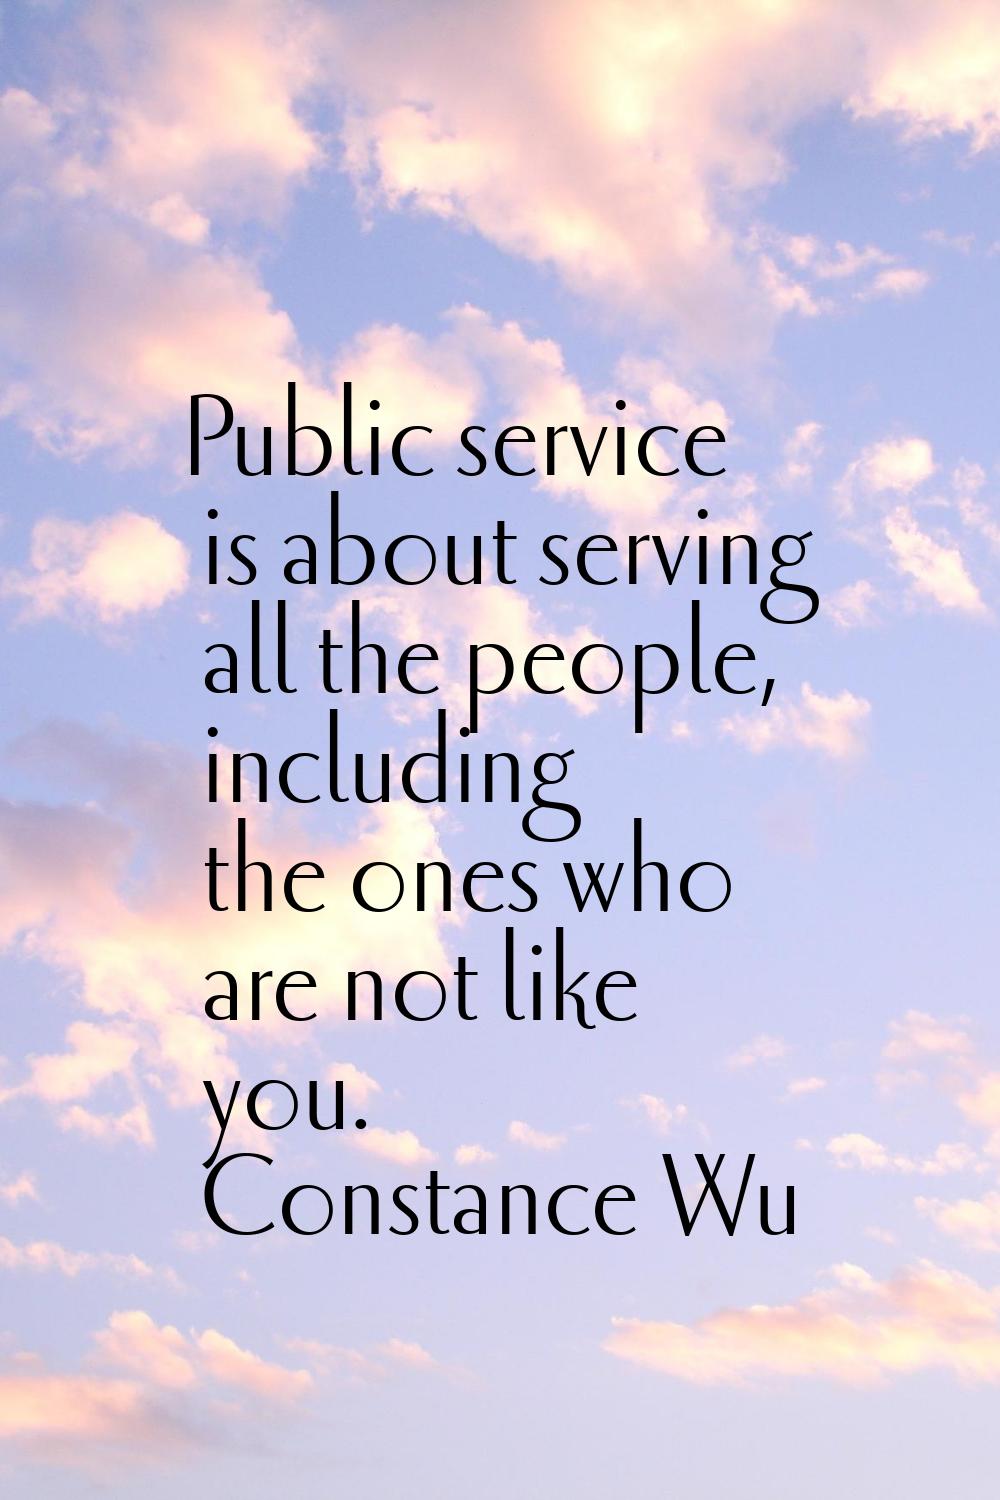 Public service is about serving all the people, including the ones who are not like you.